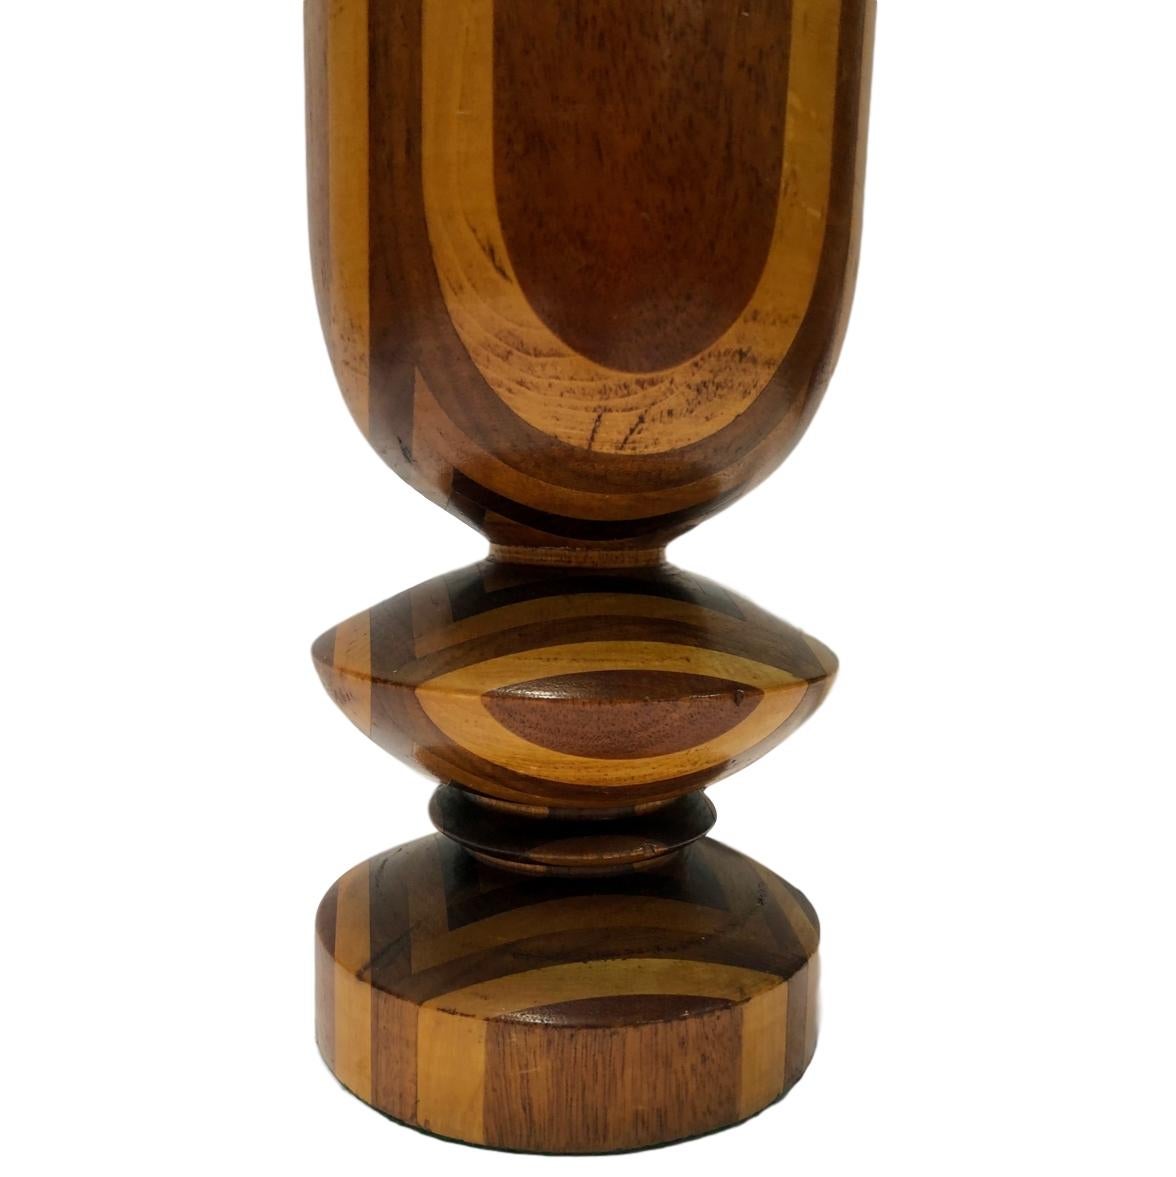 A single circa 1950s Italian two-toned turned wood table lamp.

Measurements:
Height of body: 15